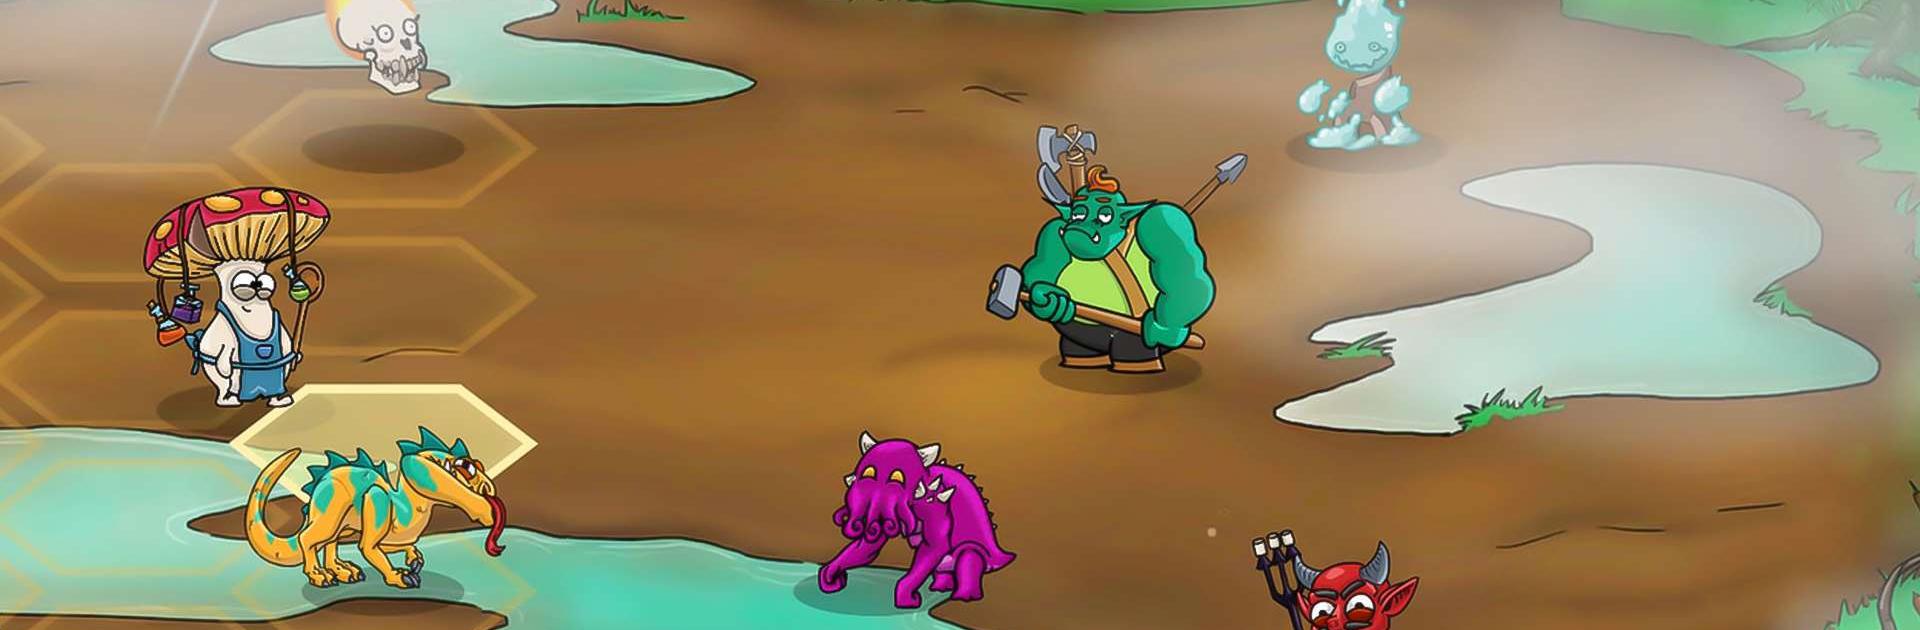 Minion Fighters: Epic Monsters